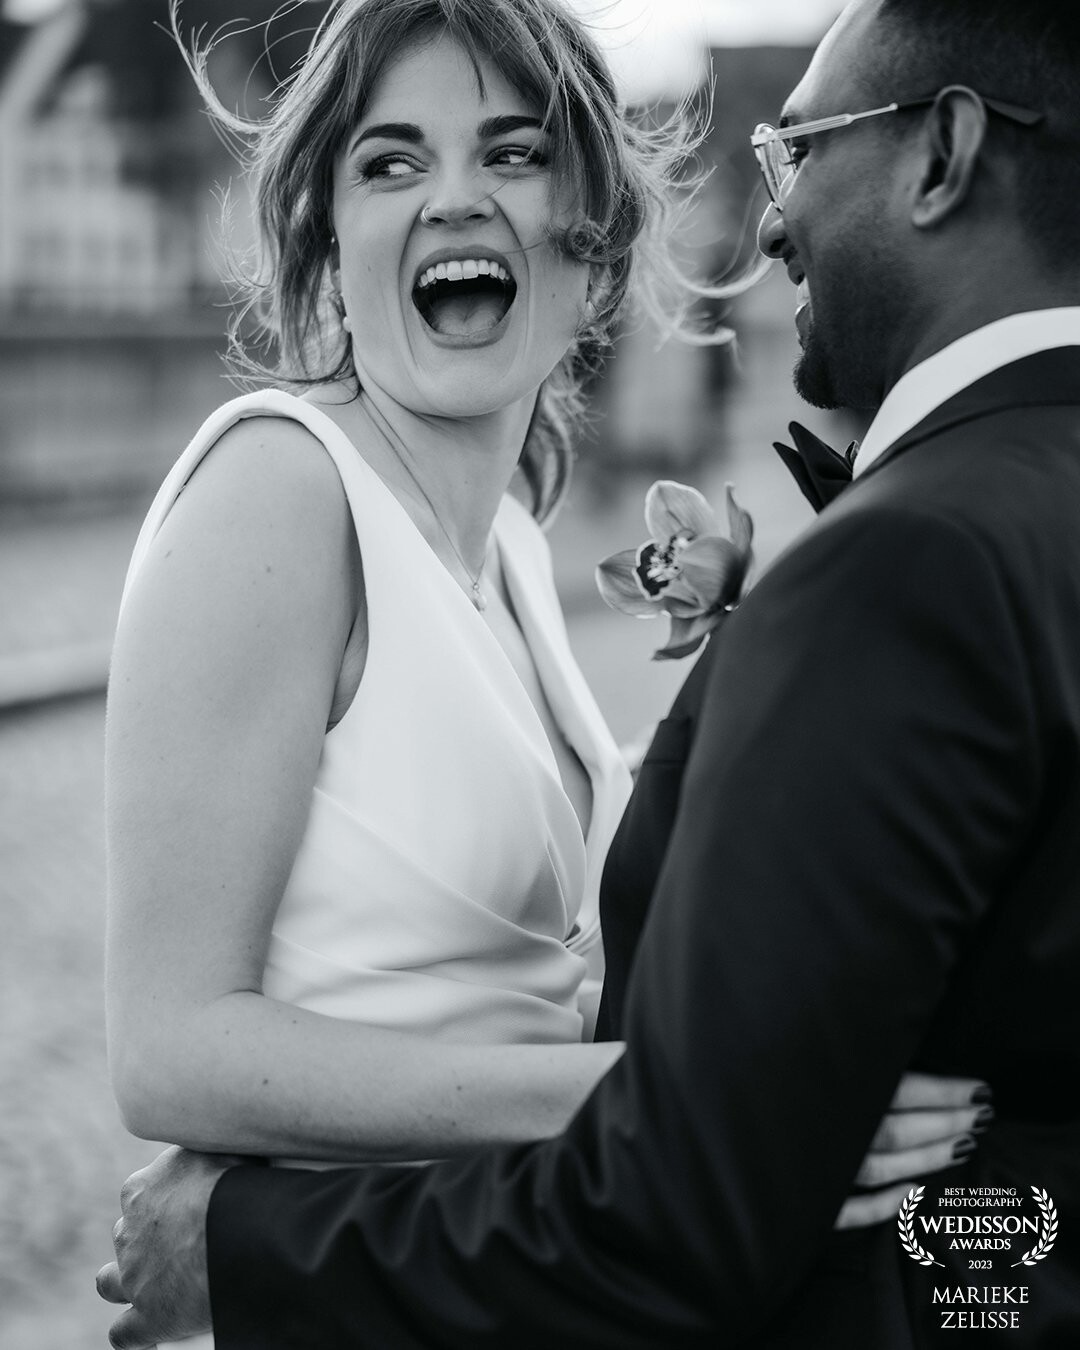 I love fun in the pictures but also the shoot on the wedding day must to be fun!